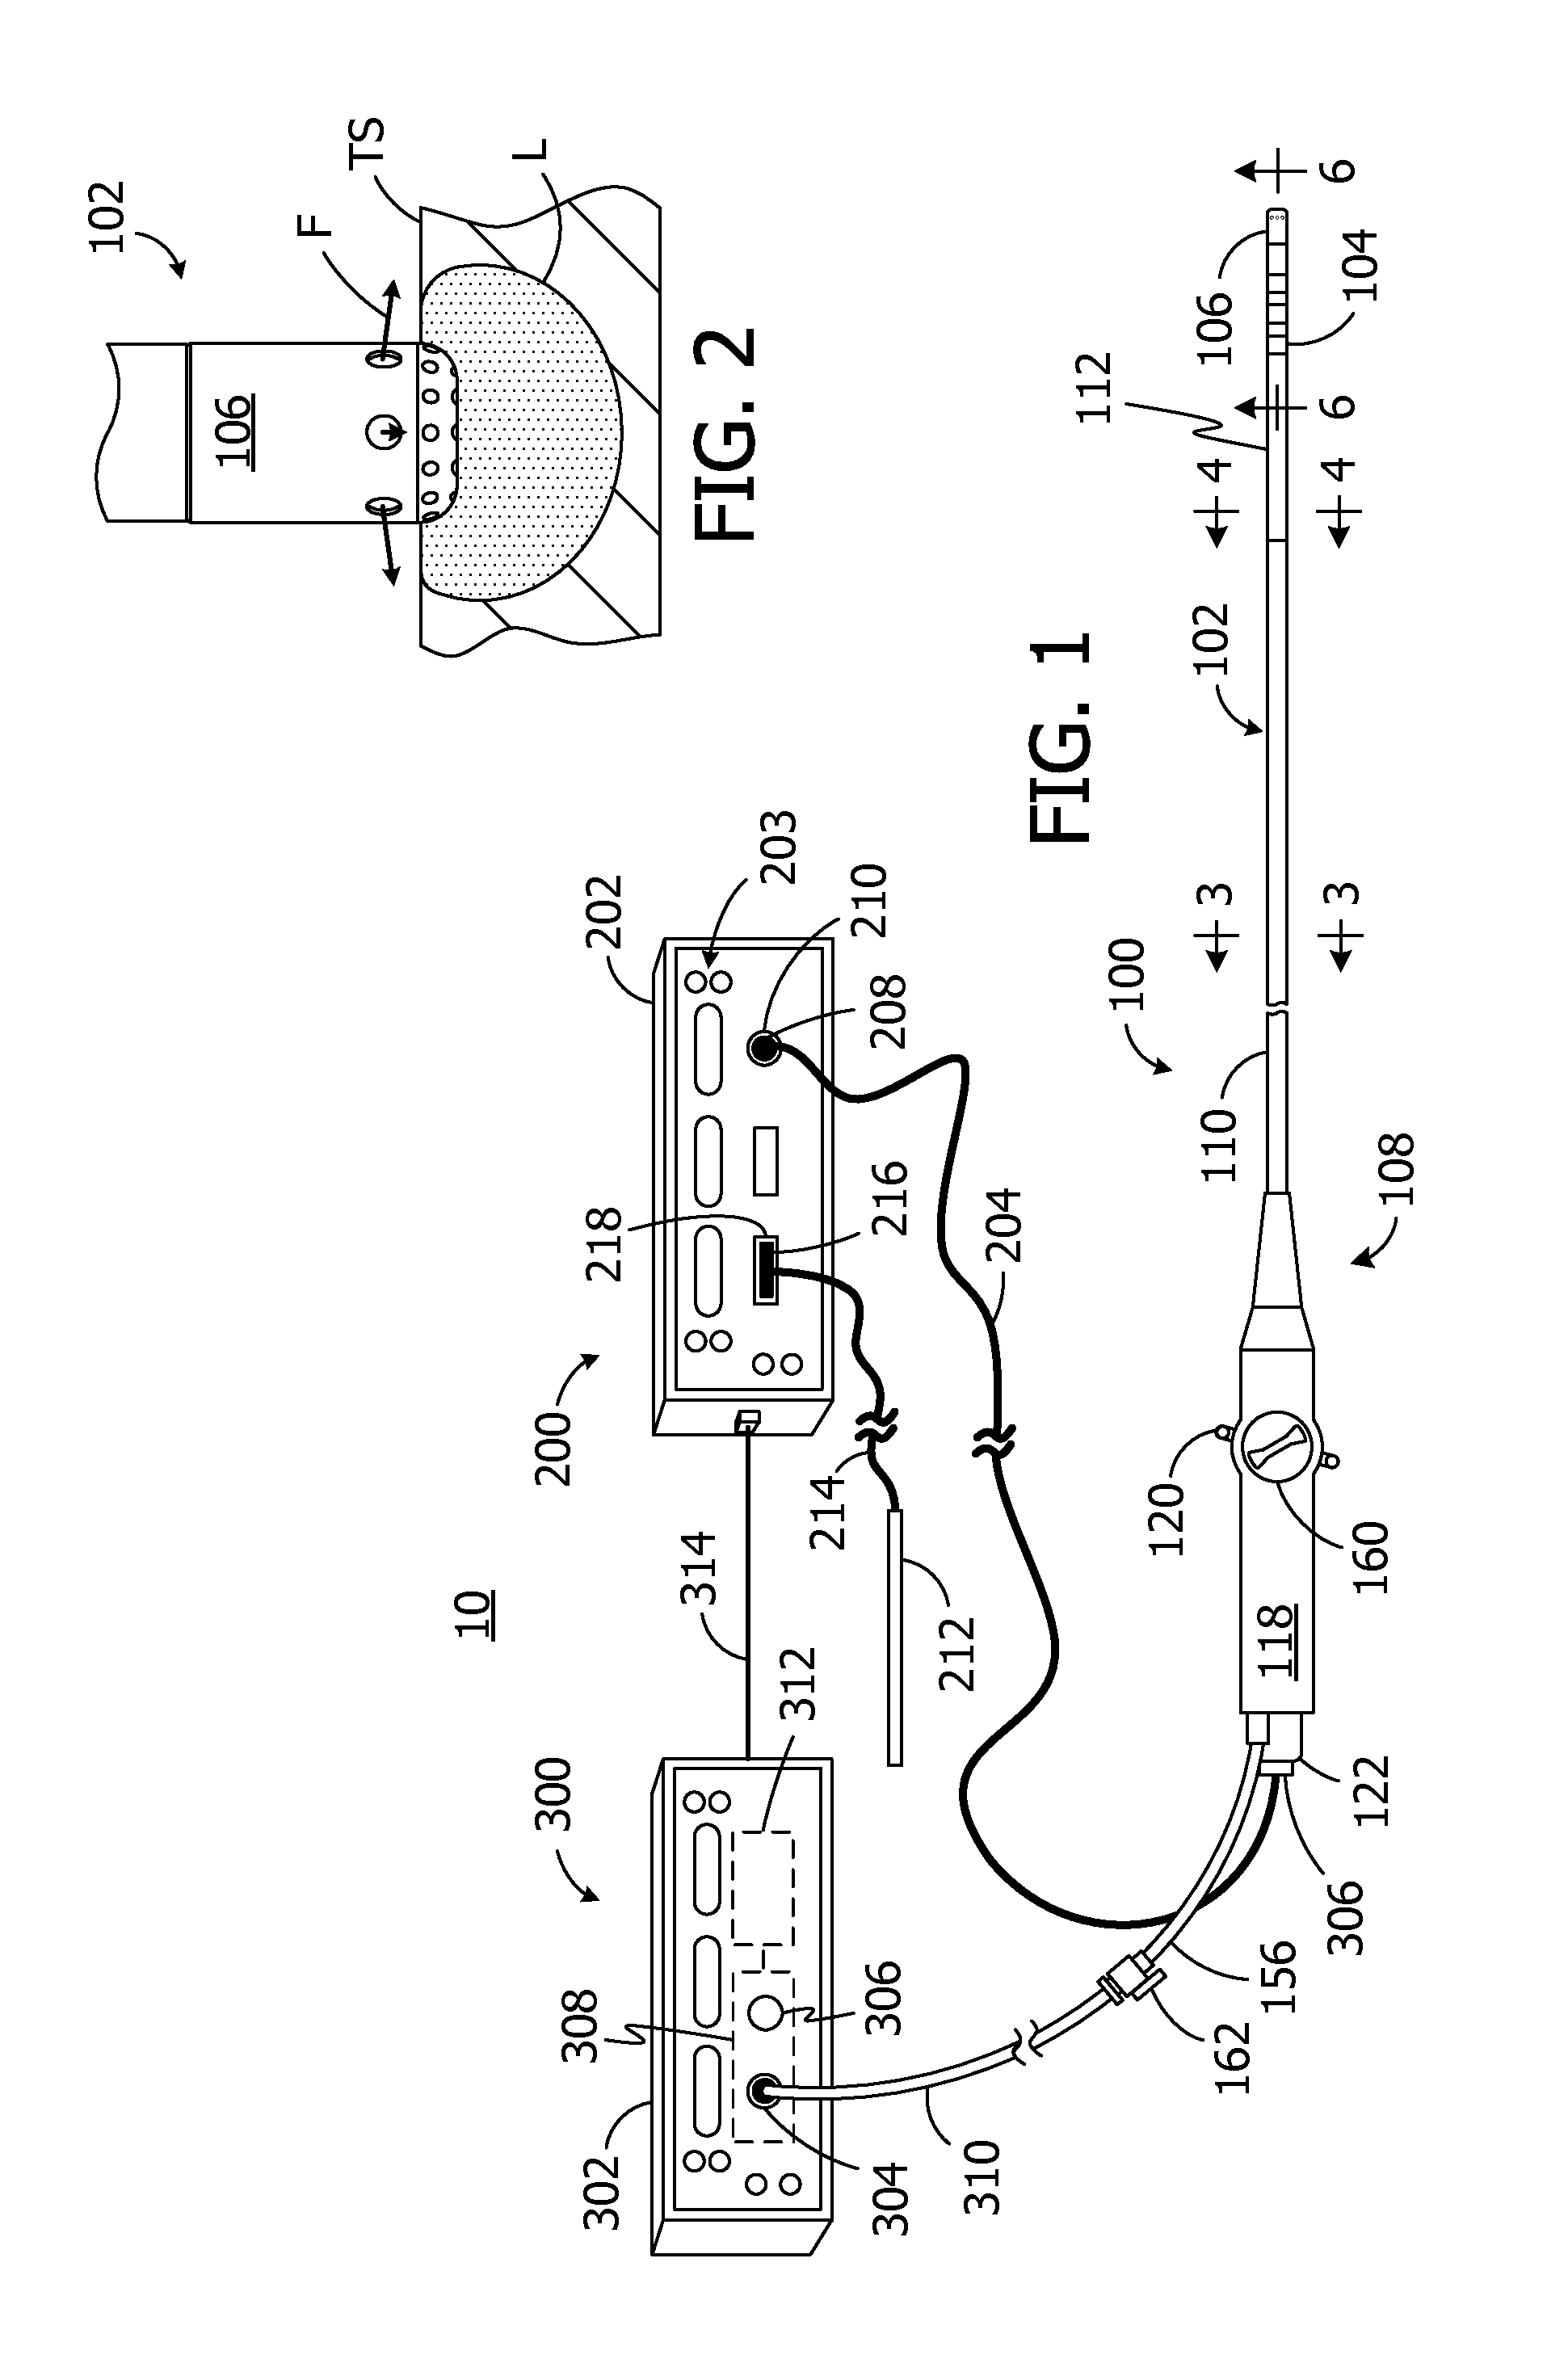 Apparatus and methods for supplying fluid to an electrophysiology apparatus